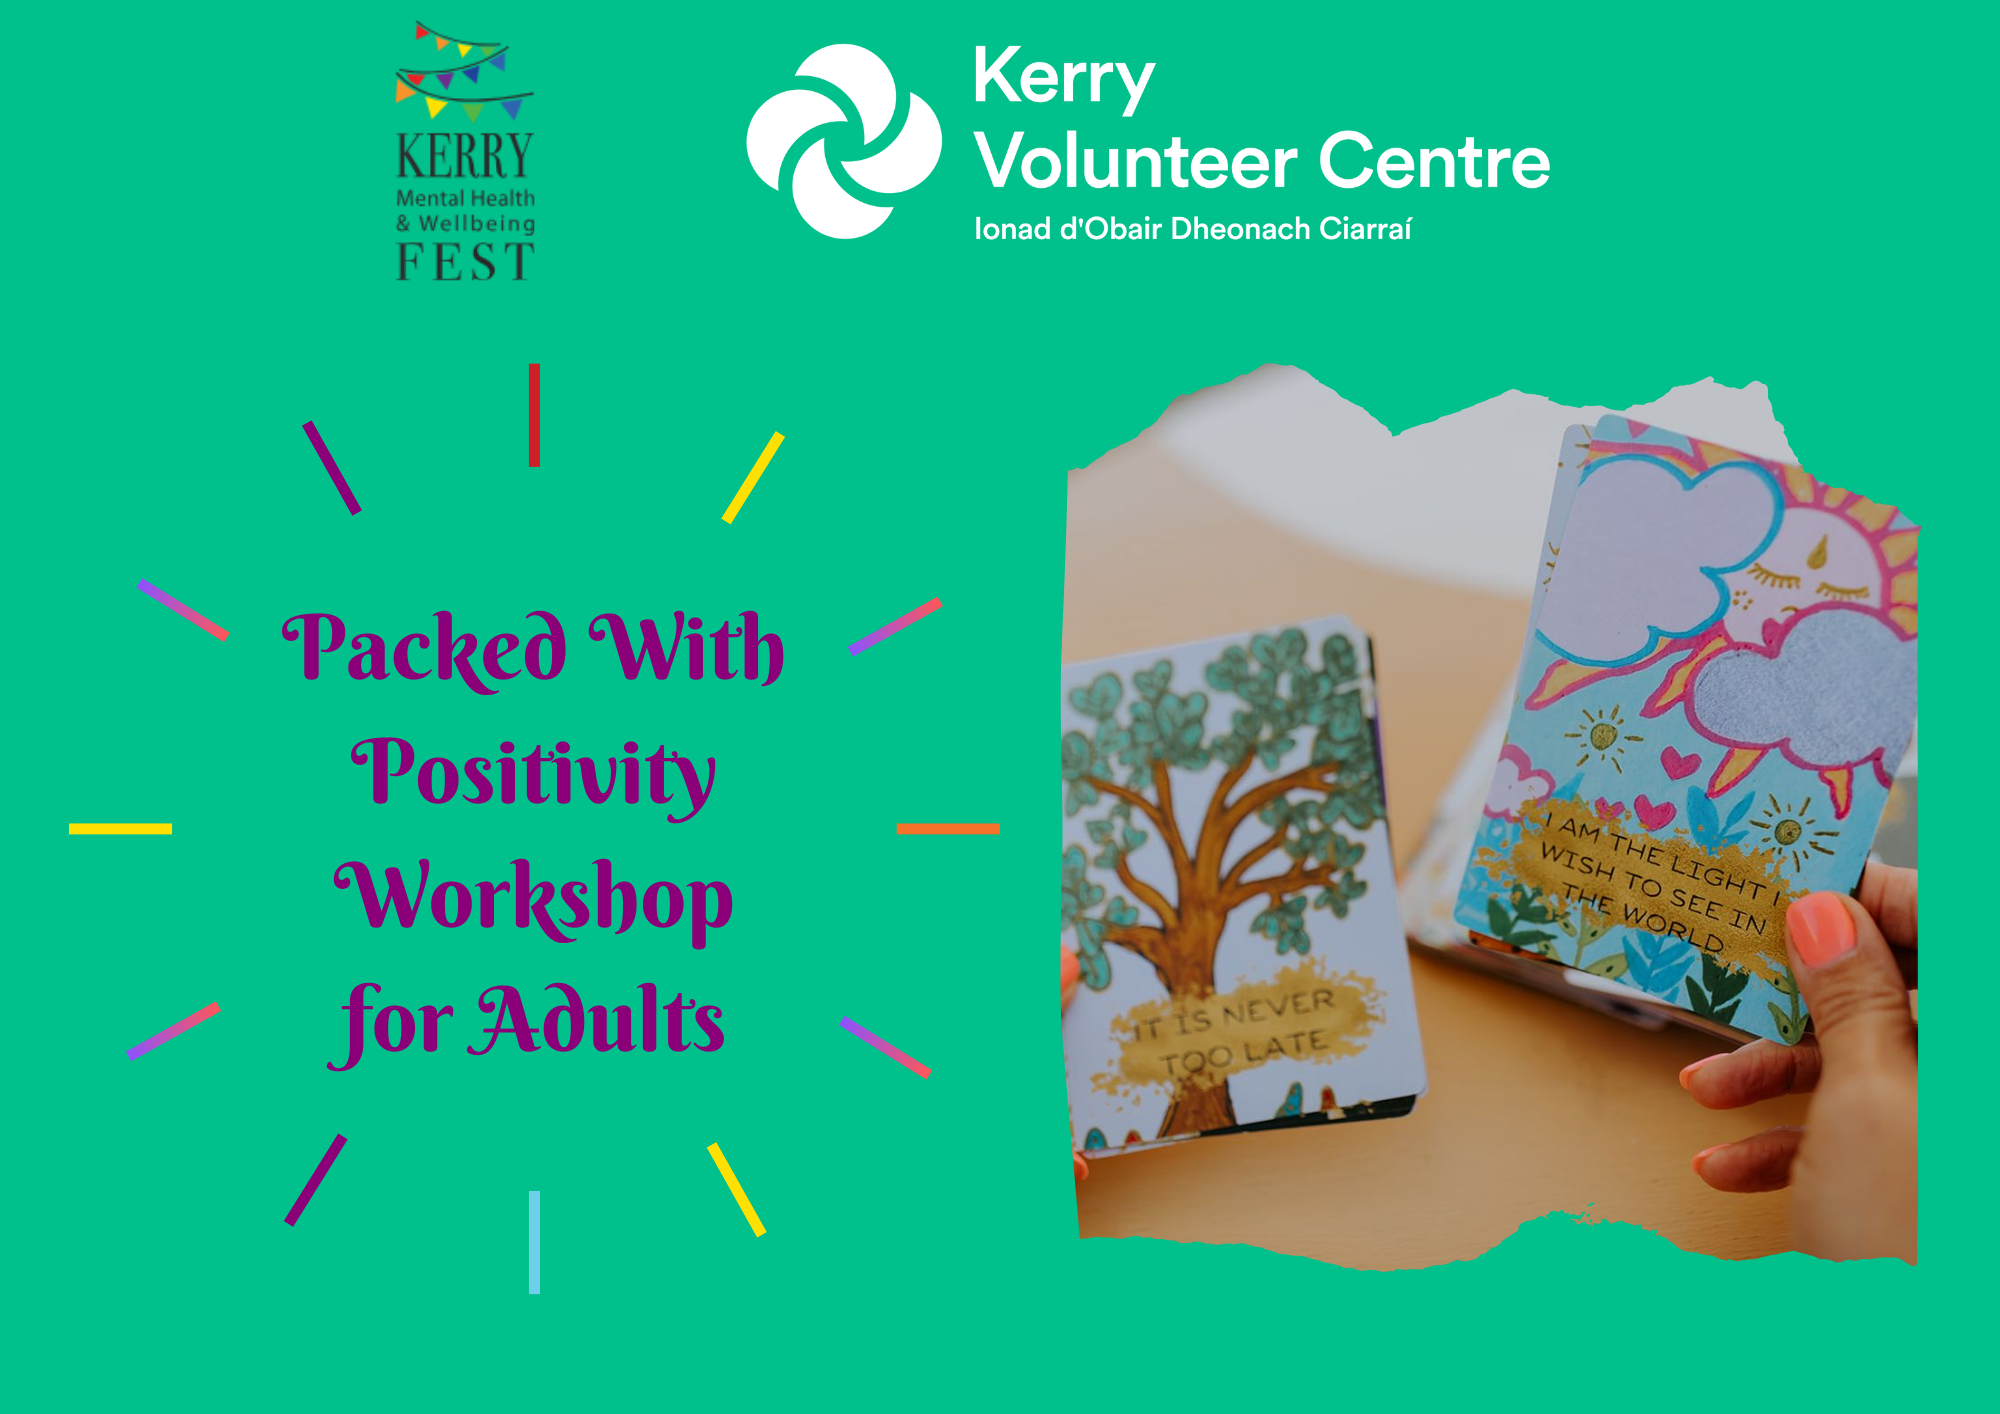 Packed With Positivity-Adult Workshop 10am -12Noon event at Kerry Mental Health & Wellbeing Fest 2022